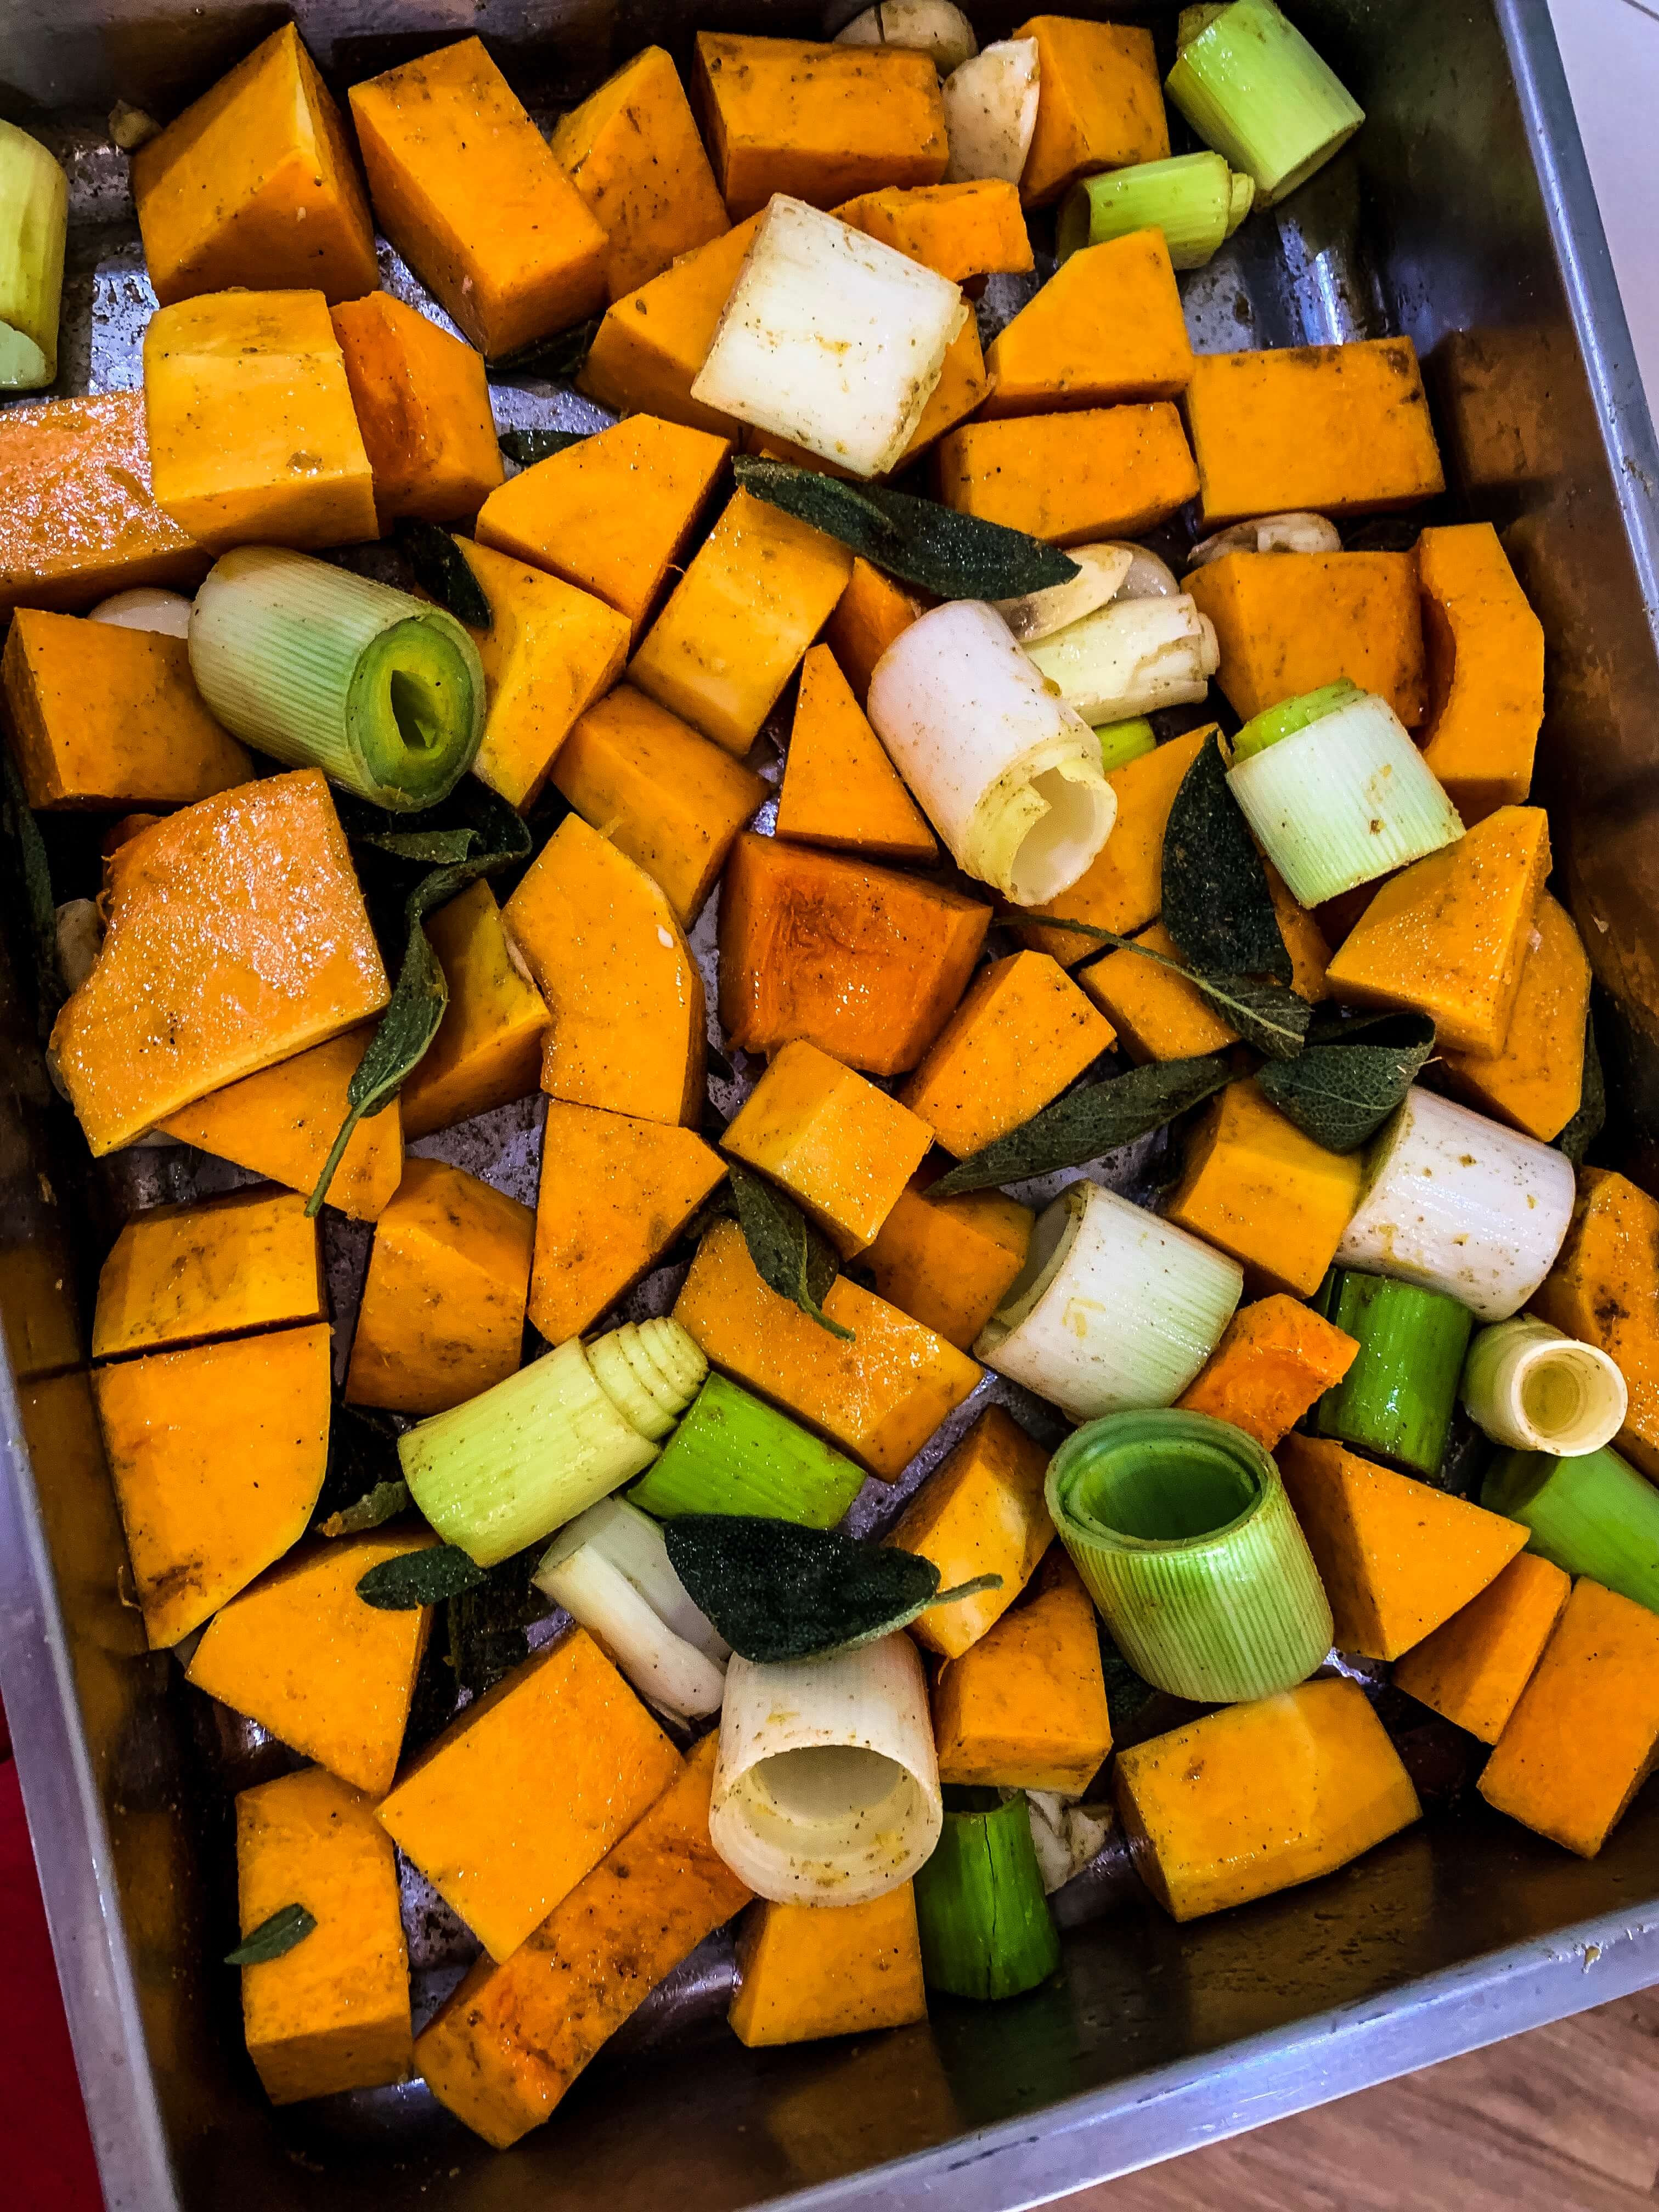 Vegetables prepped for the oven